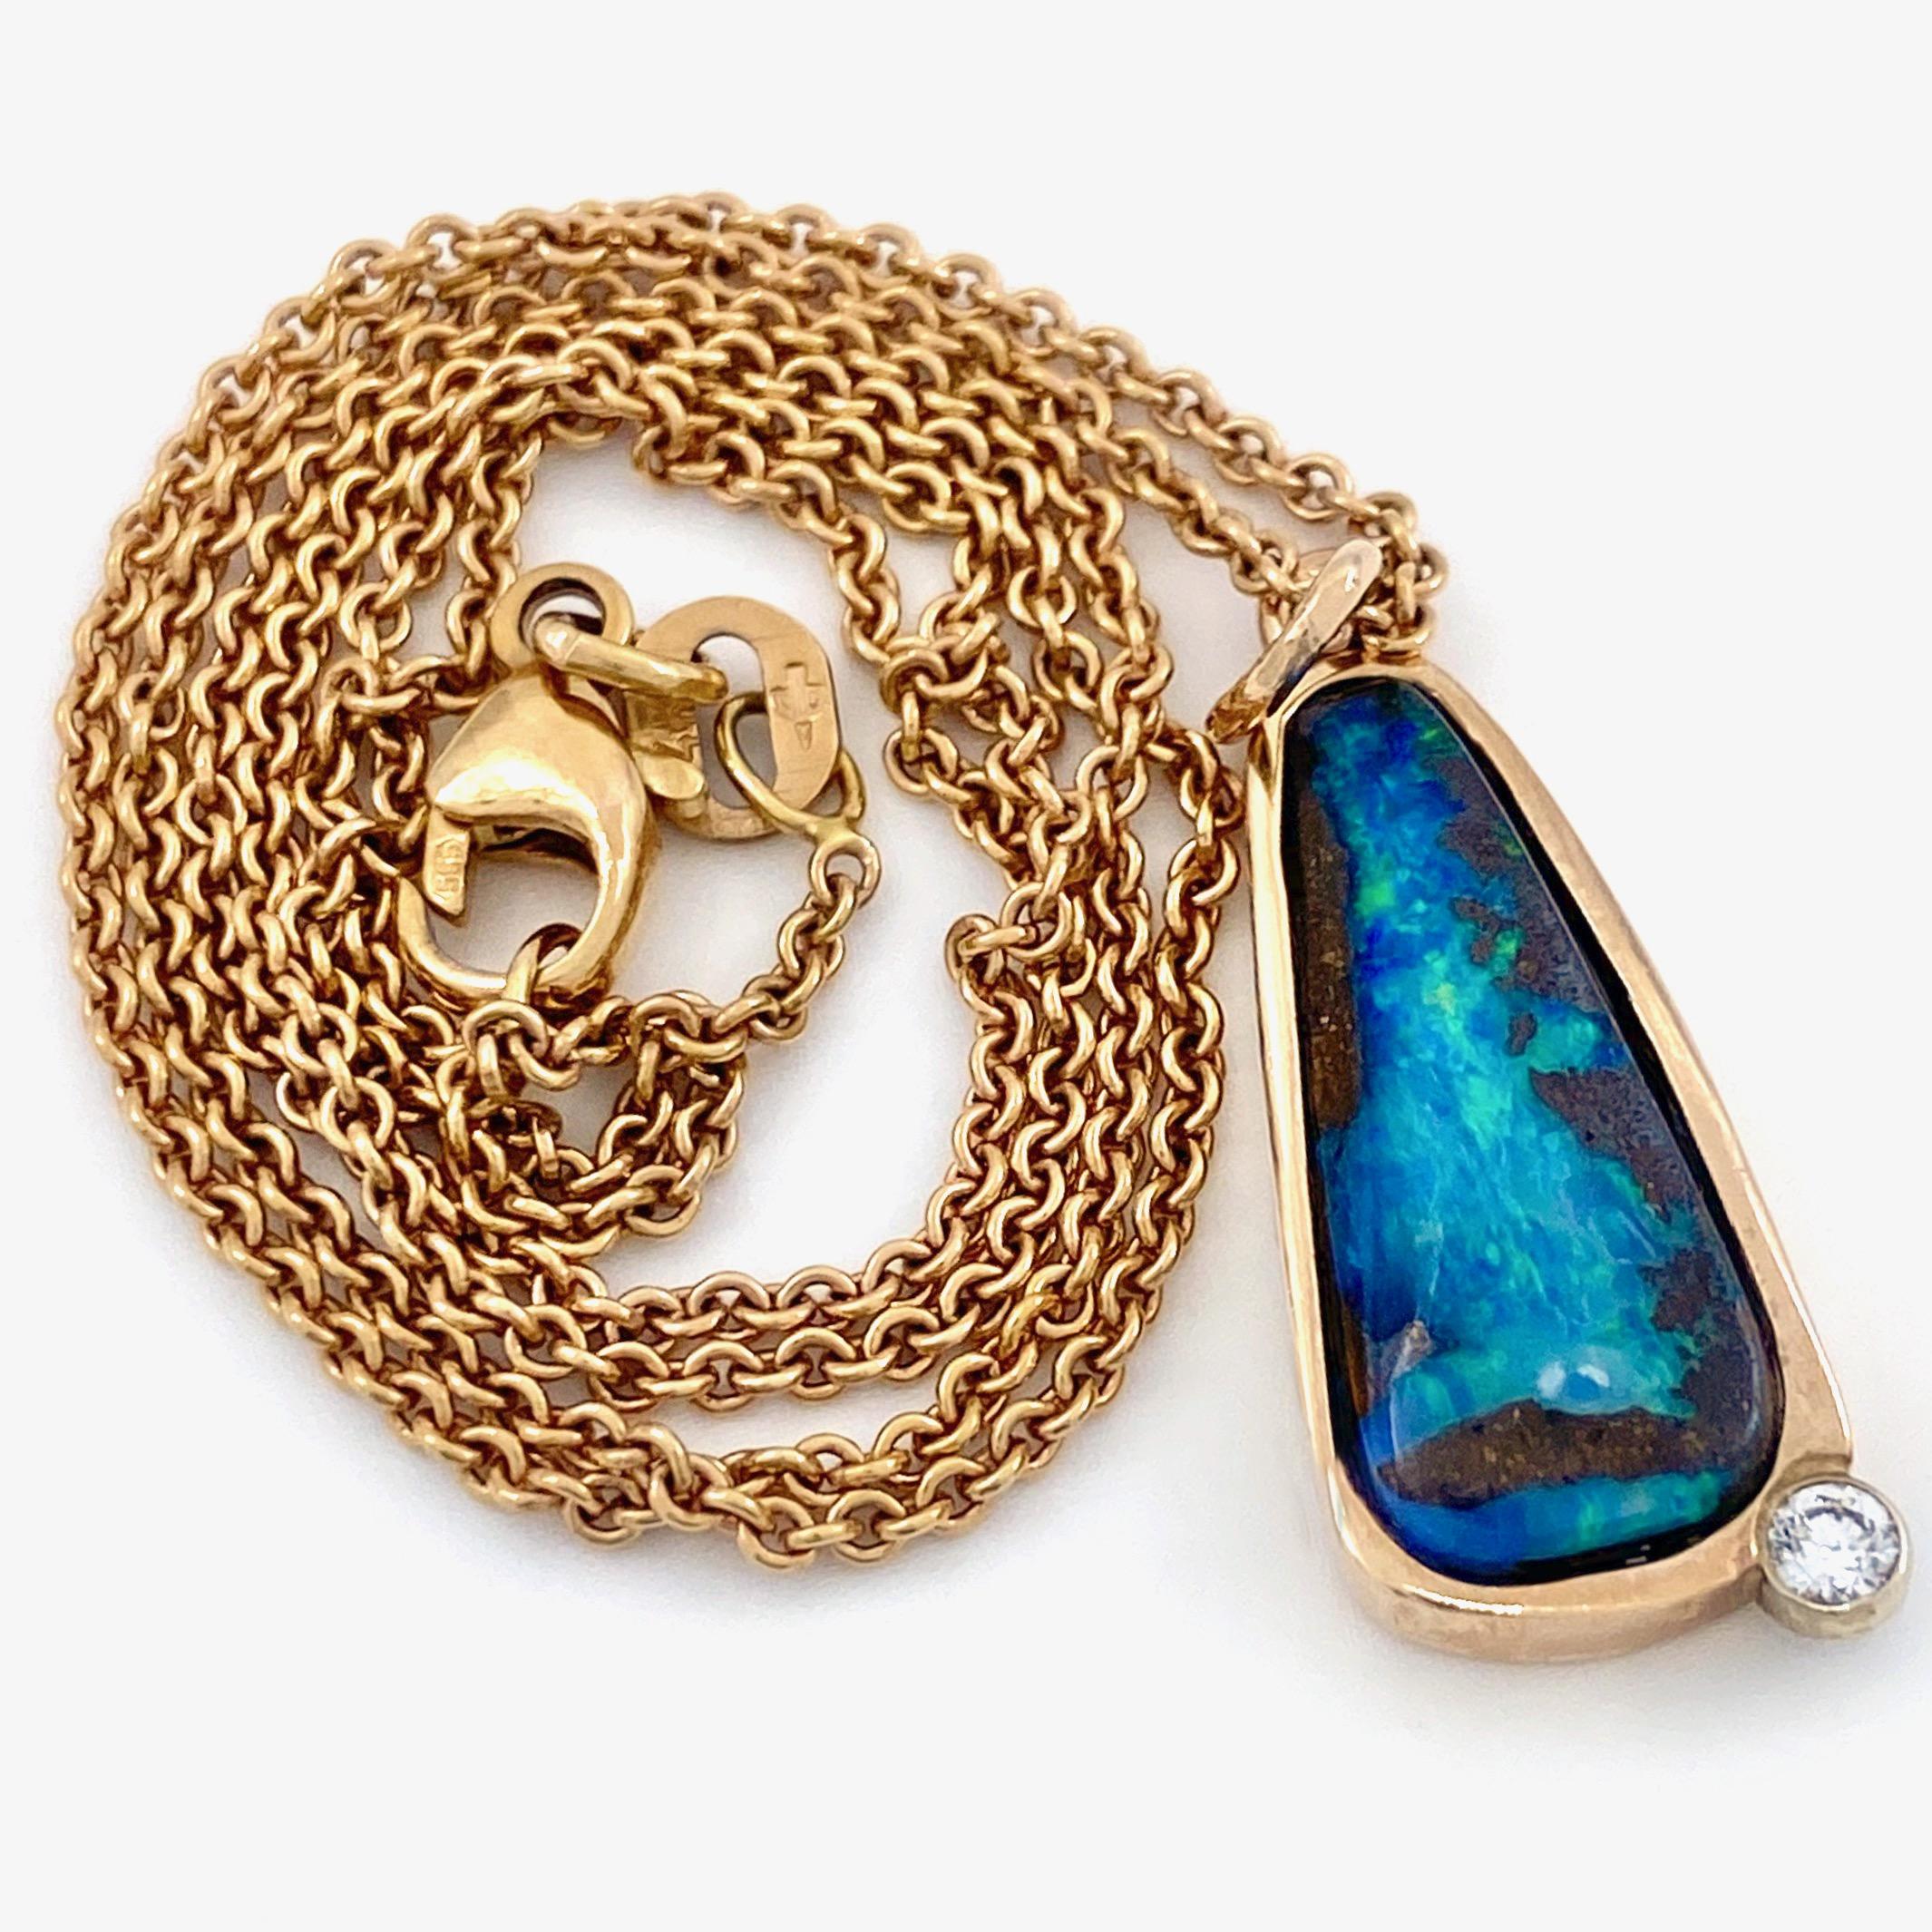 Eytan Brandes made this 14 karat rose gold pendant to show off a great little boulder opal he bought from an Australian dealer several years ago.  

With a great range of colors, all in the blue-green spectrum, the opal shows fire from the right,